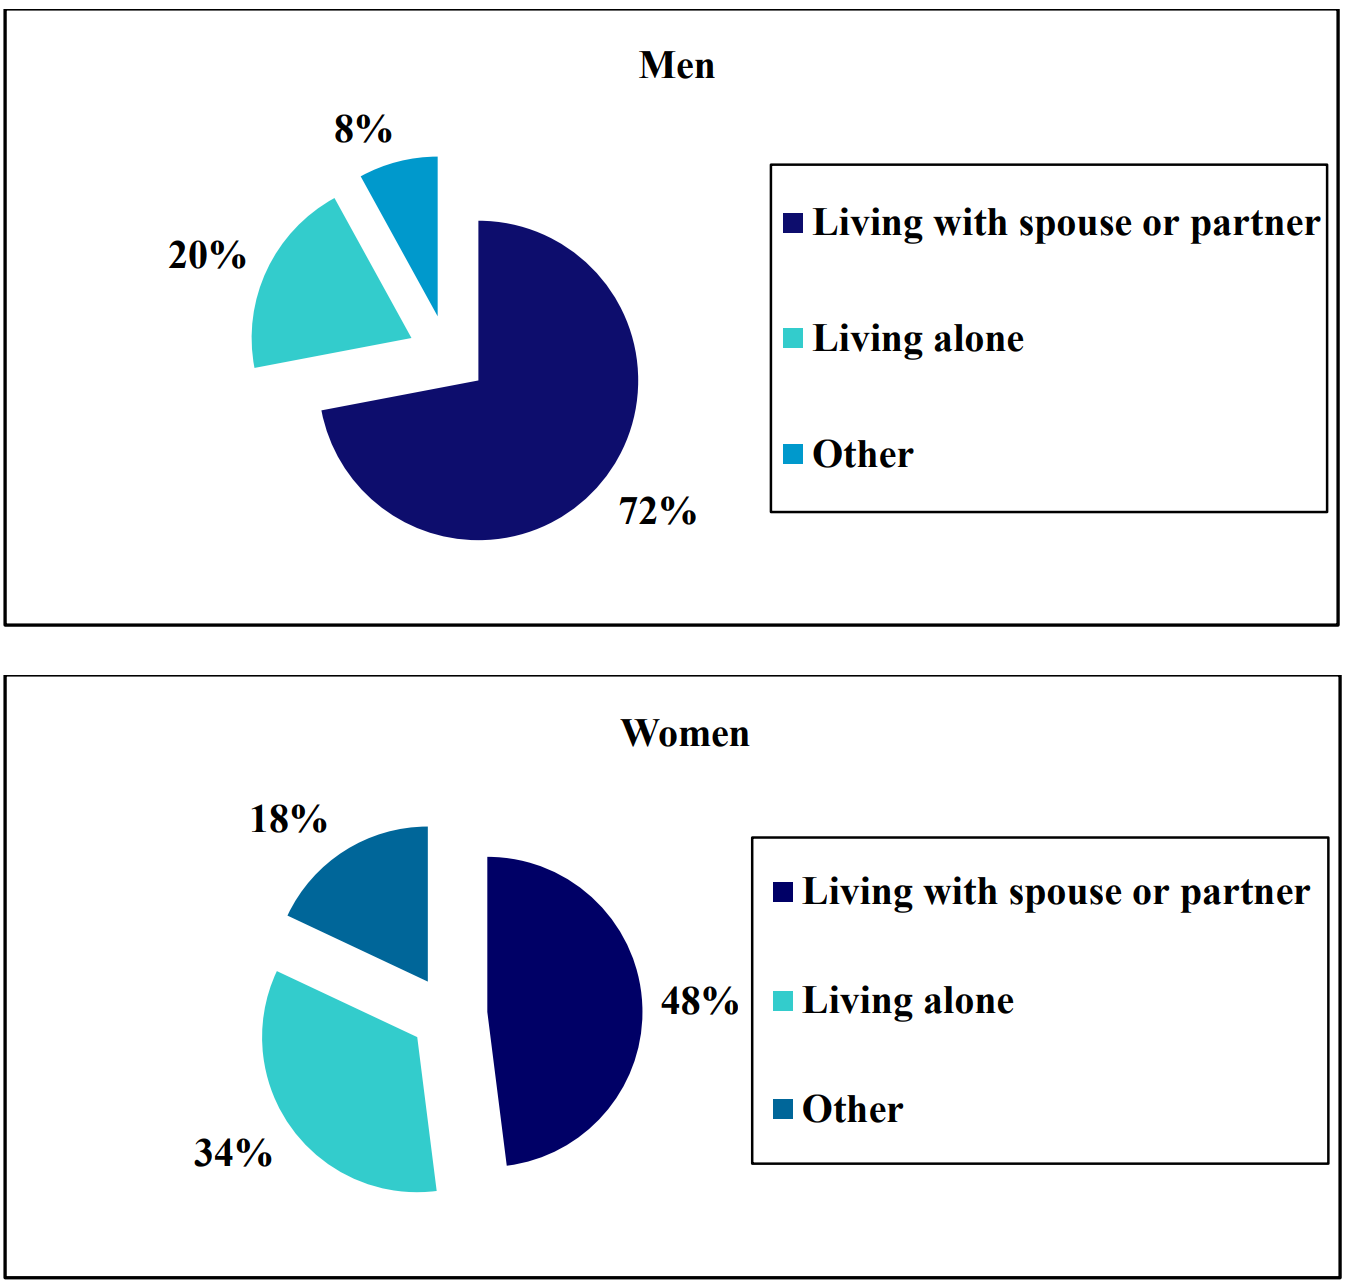 Pie charts showing the living arrangements of those aged 65 and over in 2017, divided by gender. For men, 72% were living with a spouse or partner, 20% were living alone, and 8% had other arrangements. For women, 48% were living with a spouse or partner, 34% were living alone, and 18% had other arrangements.